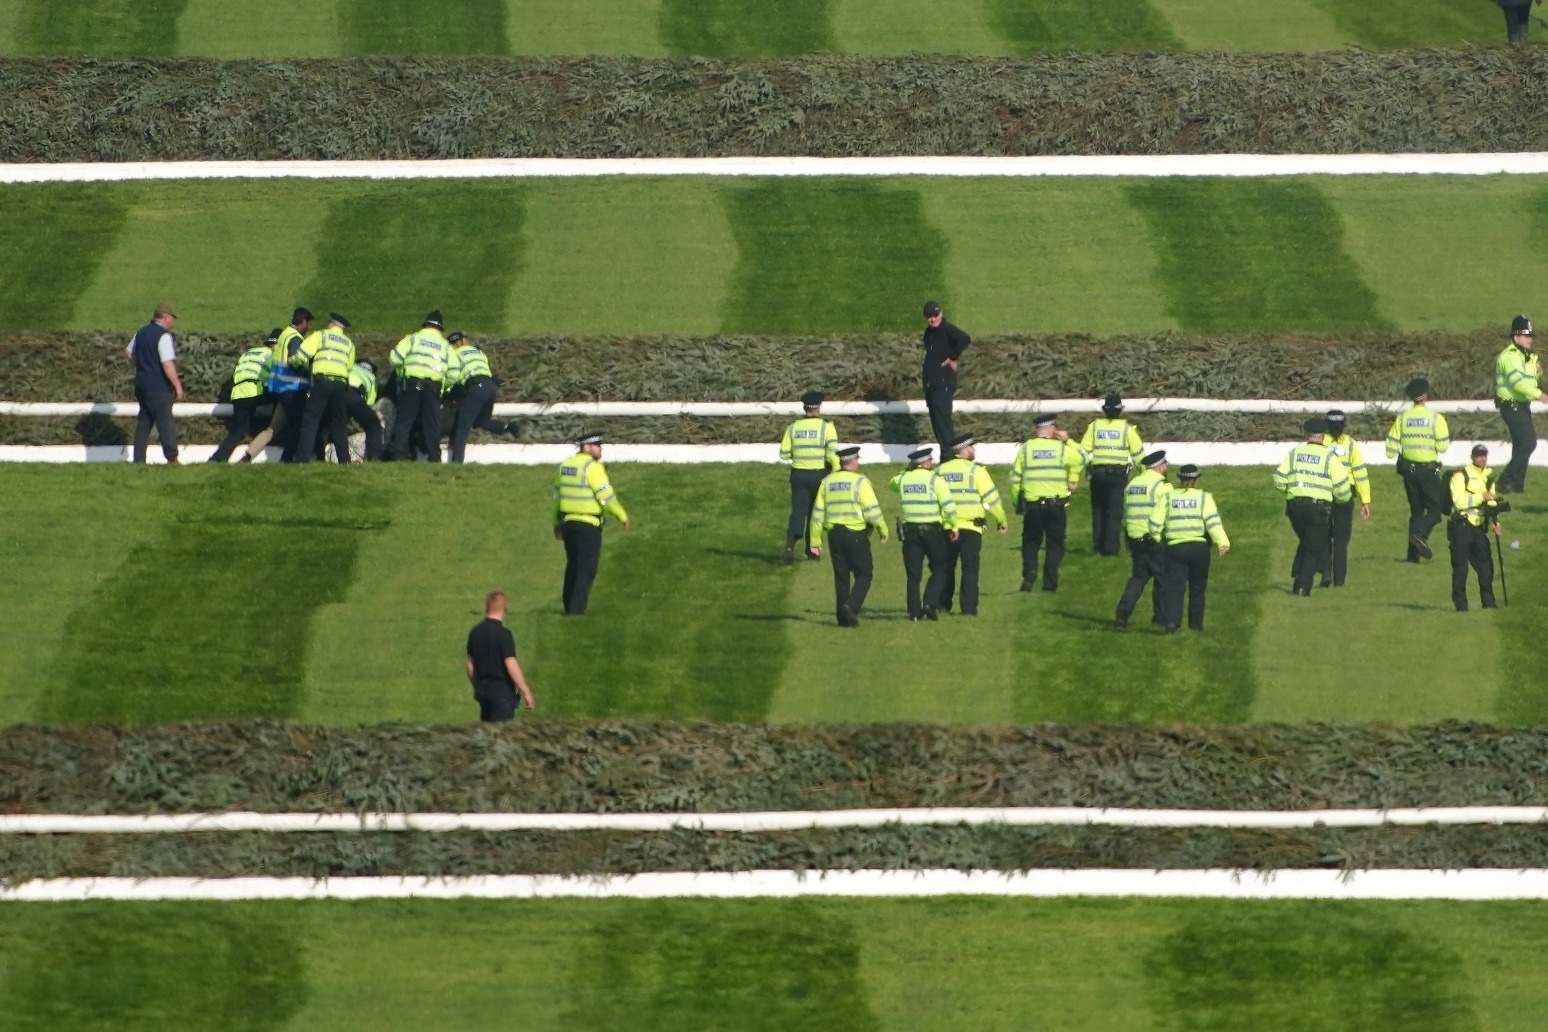 More than 100 arrested after protesters storm Grand National and delay race 